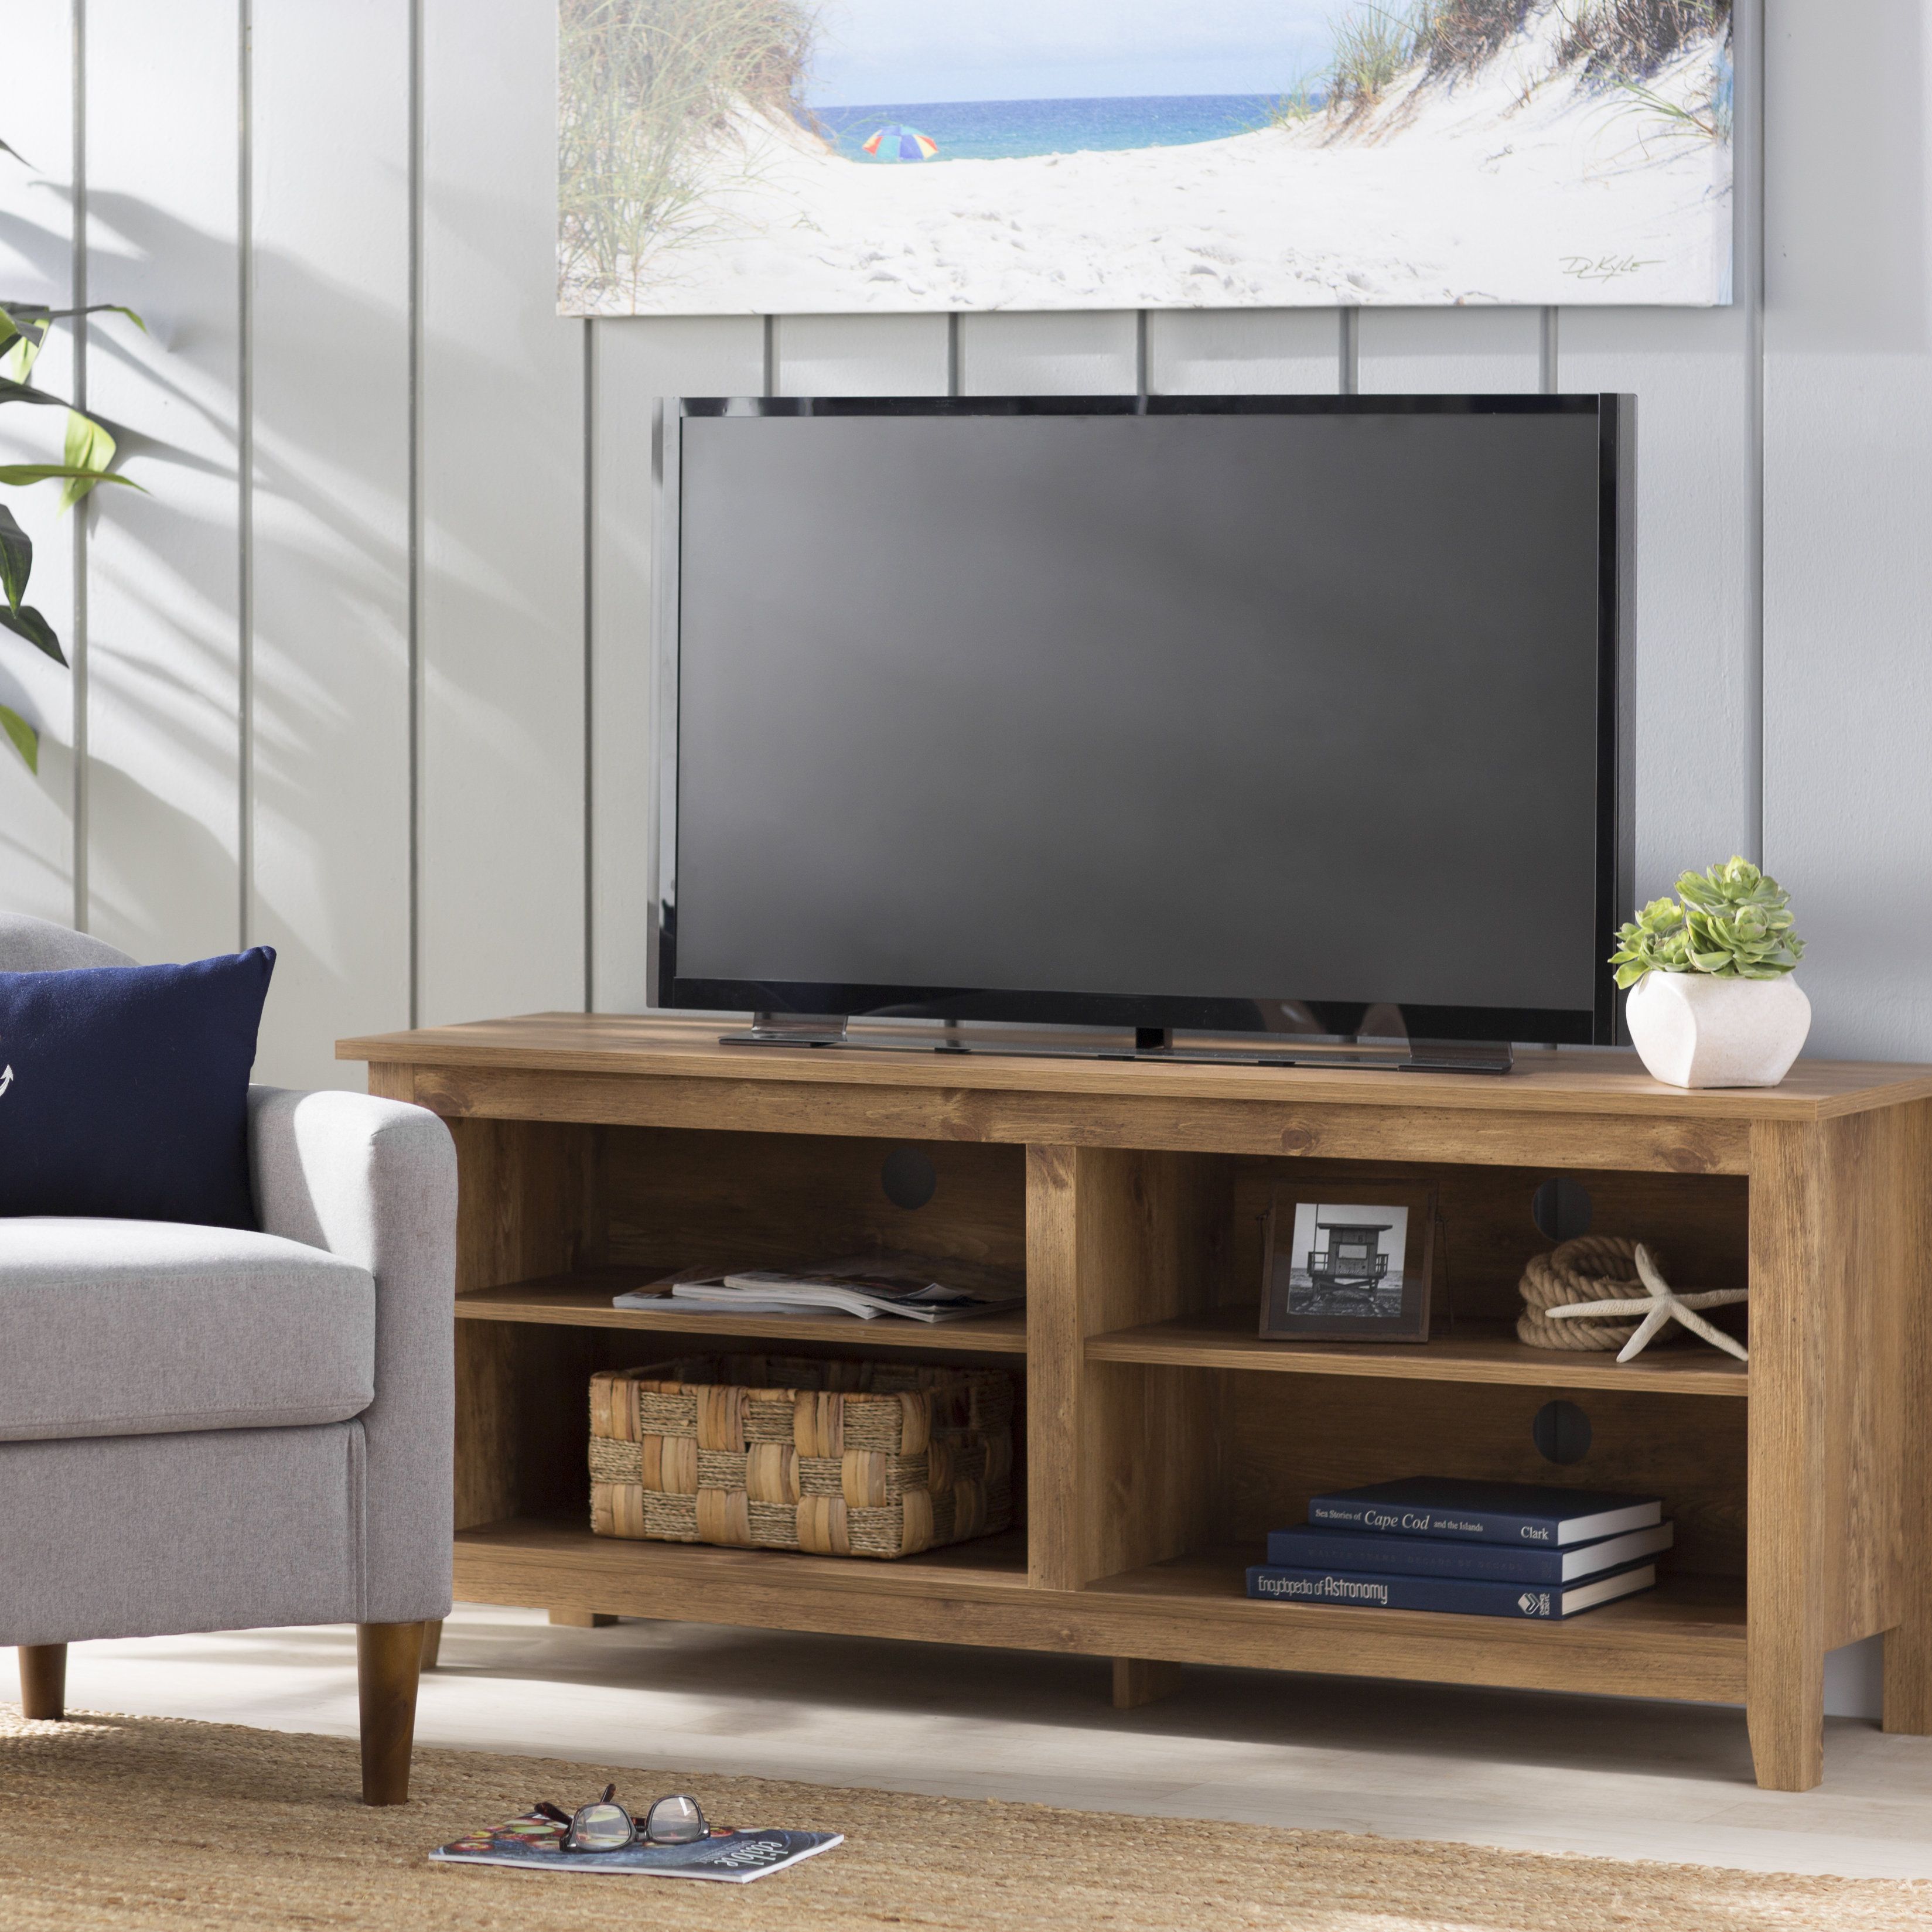 90 Inch Tv Stand | Wayfair Inside Century Blue 60 Inch Tv Stands (View 6 of 30)